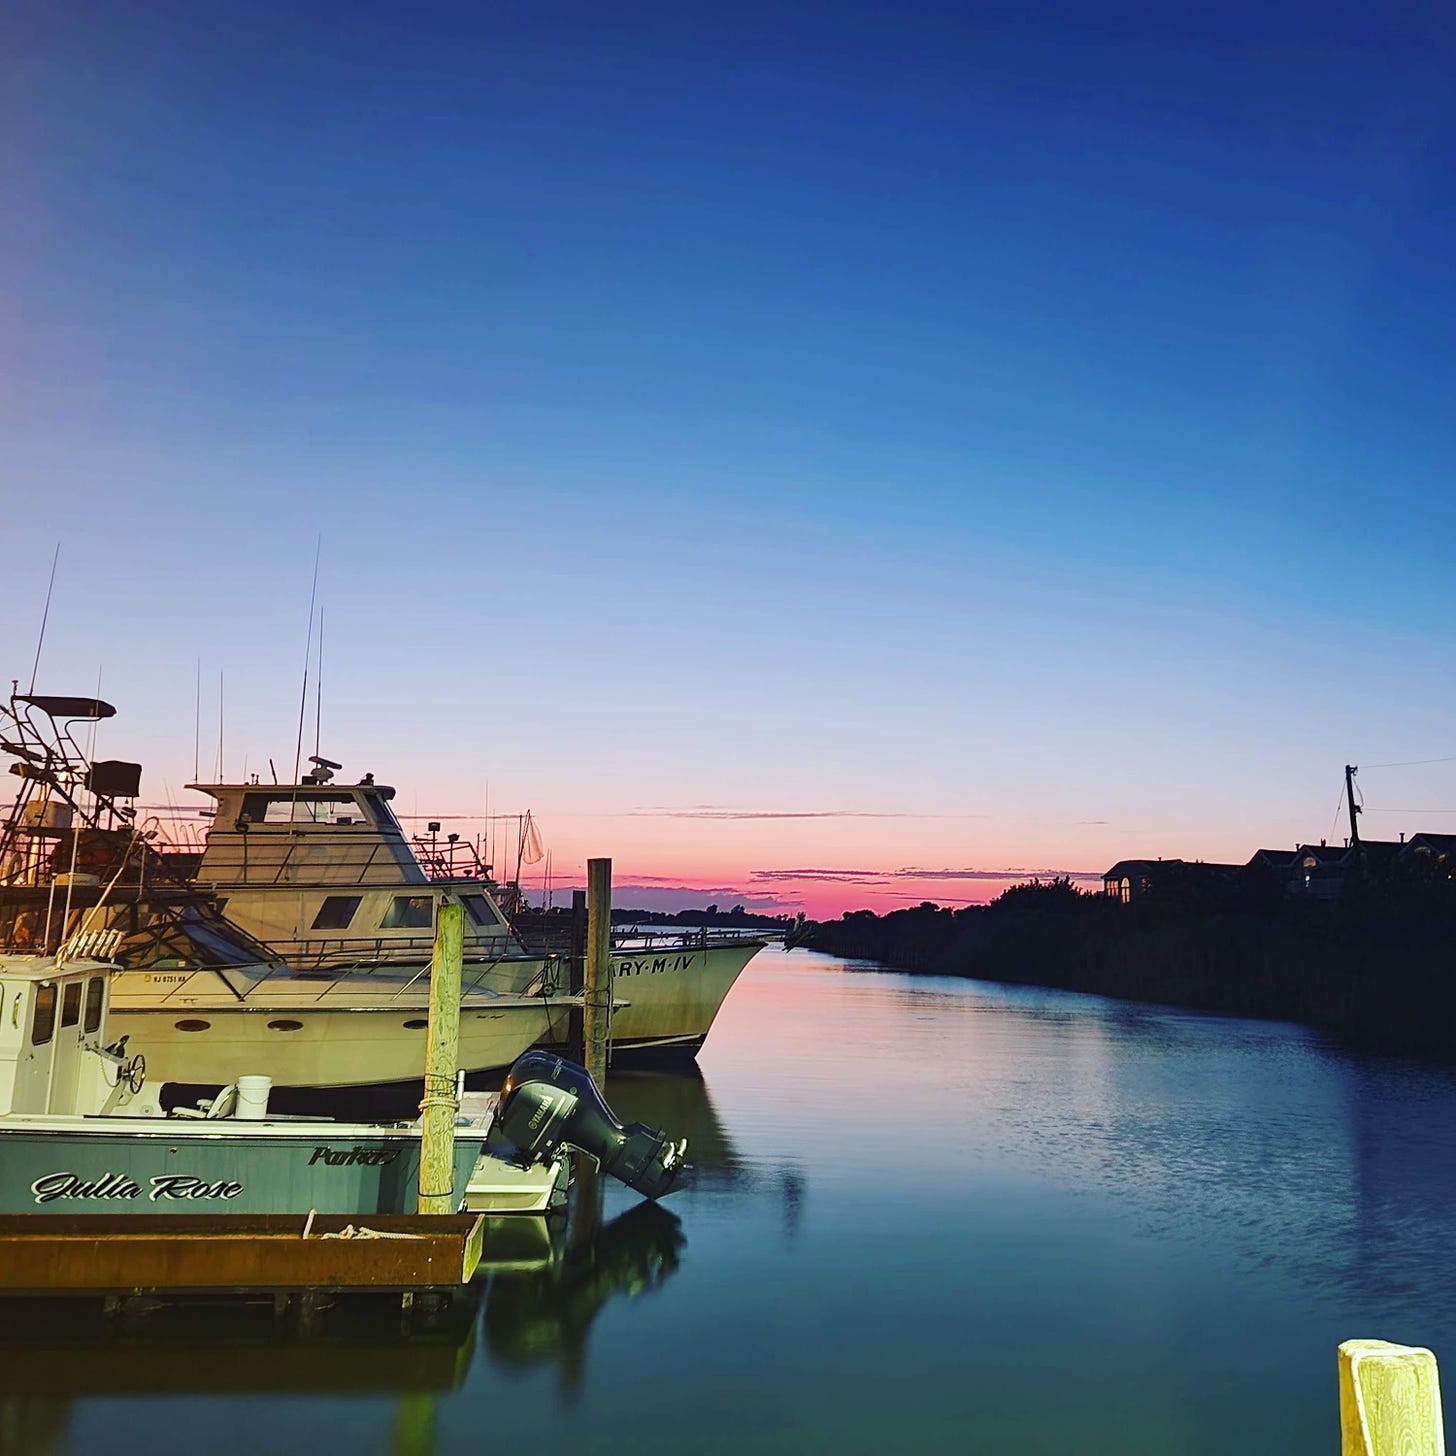 A rich blue sky and a pink line of sunset behind several dirty fishing boats in a blue harbor.